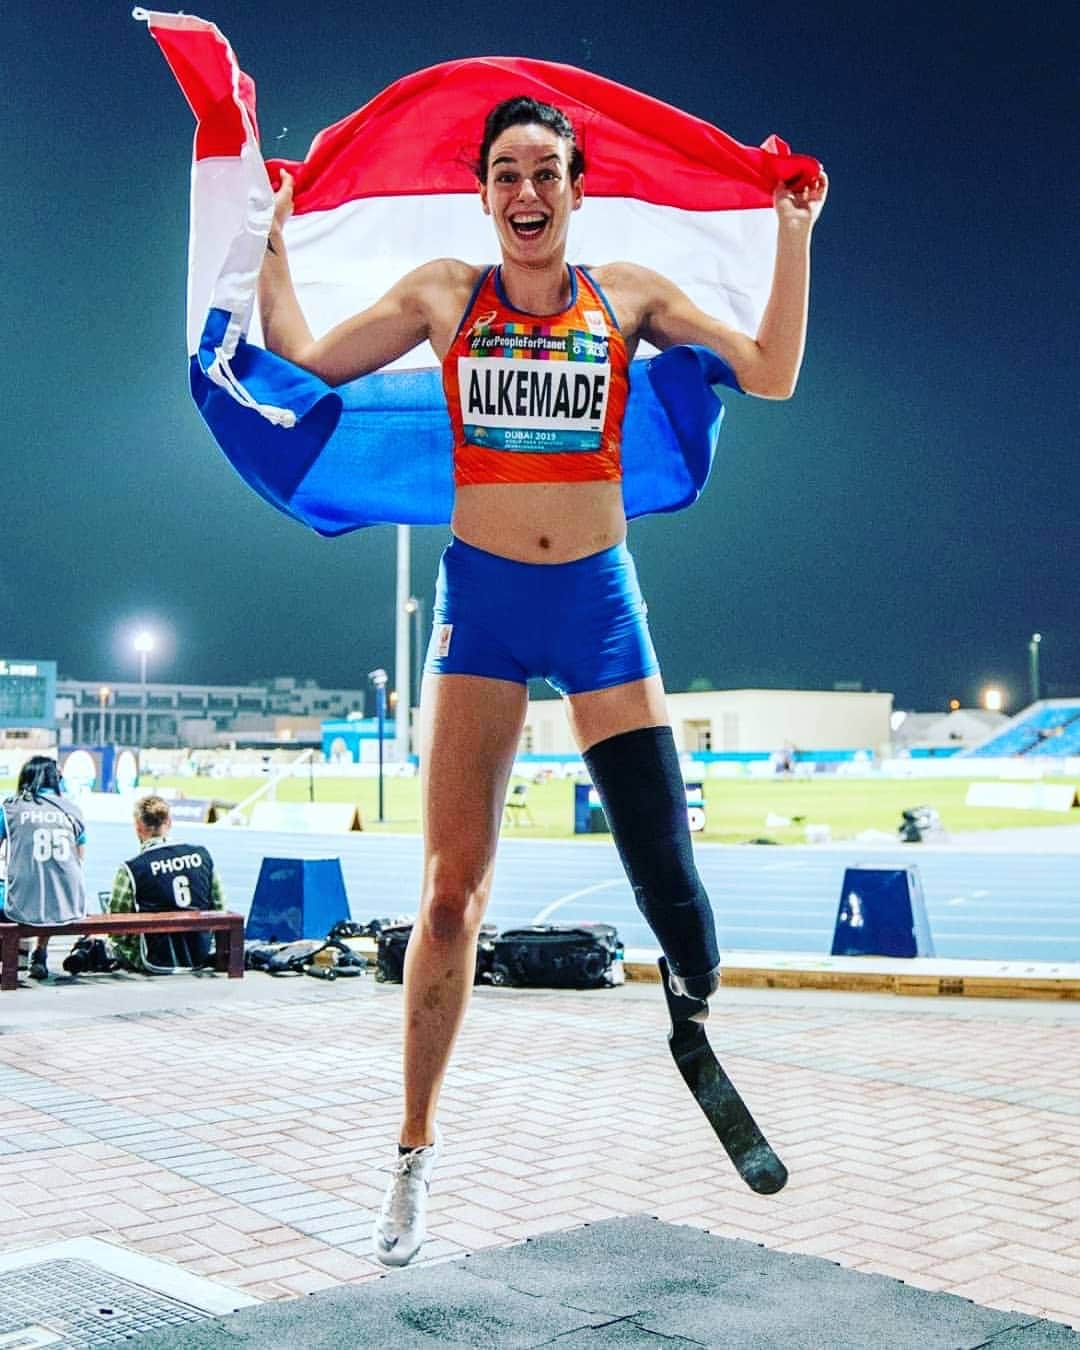 runplanetのインスタグラム：「Send your pic to our DM to be featured!♥ Follow @Runplanet  for more motivation! Is it true? Would I perform well enough to be photographed with such a beautiful Dutch flag? Yes it's true. ⠀ Photo by @helenewiesenhaanphotography ⠀  #runplanet #runday #nikerunningclub #runfit #igrun #altrarunning #stravarun #runshots #happyrunning #runstagram #runaddict #runningday #runningtime #runspiration #justrun #runninginspiration #runningworld #runningmakesmehappy #runningclub #runninglove #runinspiration #nikerunner #trainingrun #runnerspace #runners_of_insta #runningcommunity #worlderunners #instarunning  #runnig #runtastic  ⠀」